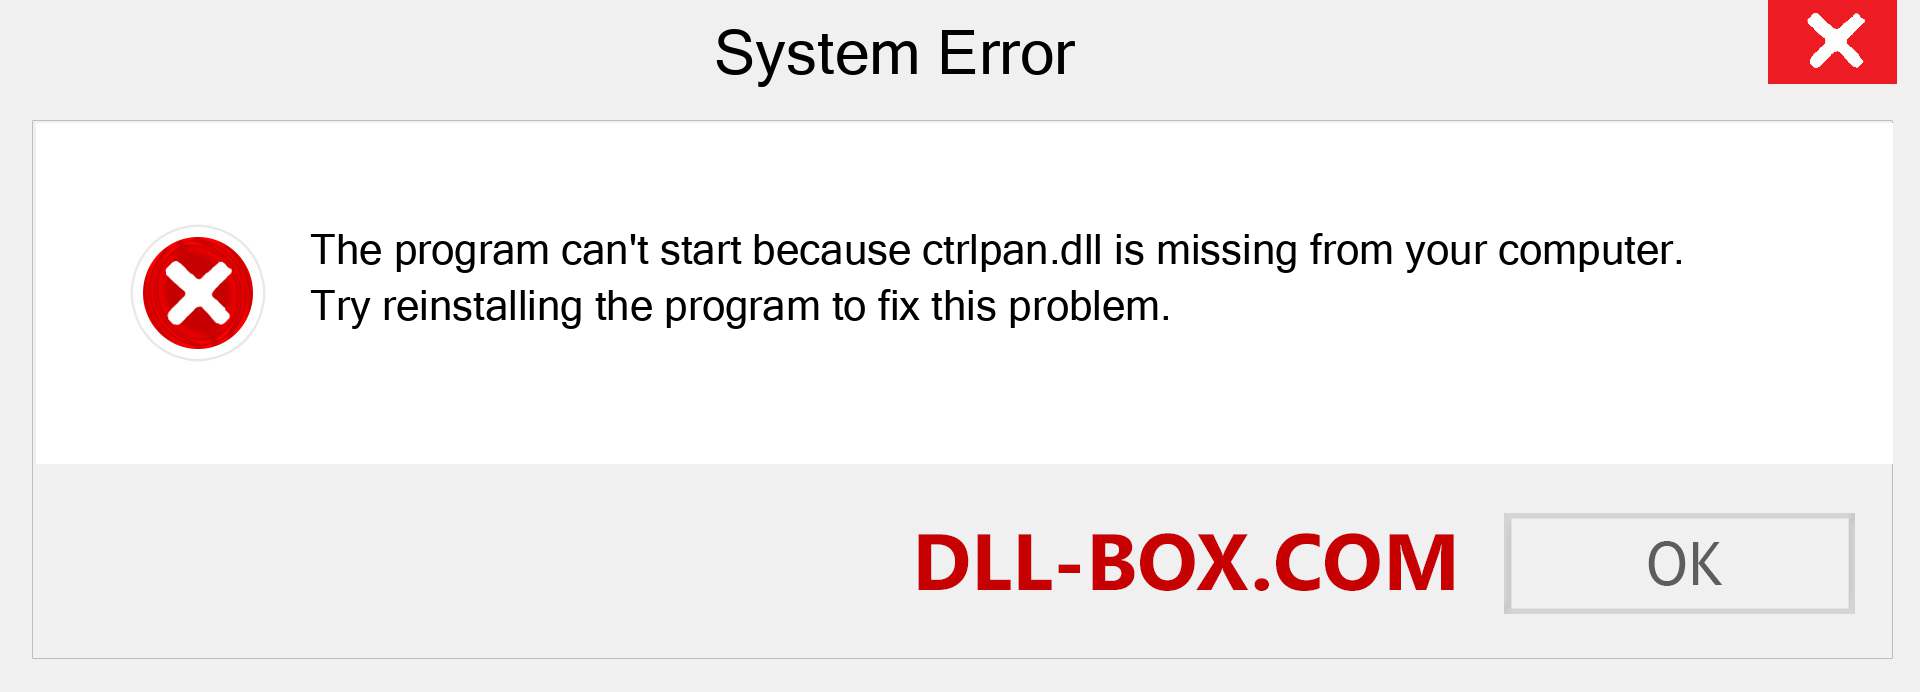  ctrlpan.dll file is missing?. Download for Windows 7, 8, 10 - Fix  ctrlpan dll Missing Error on Windows, photos, images